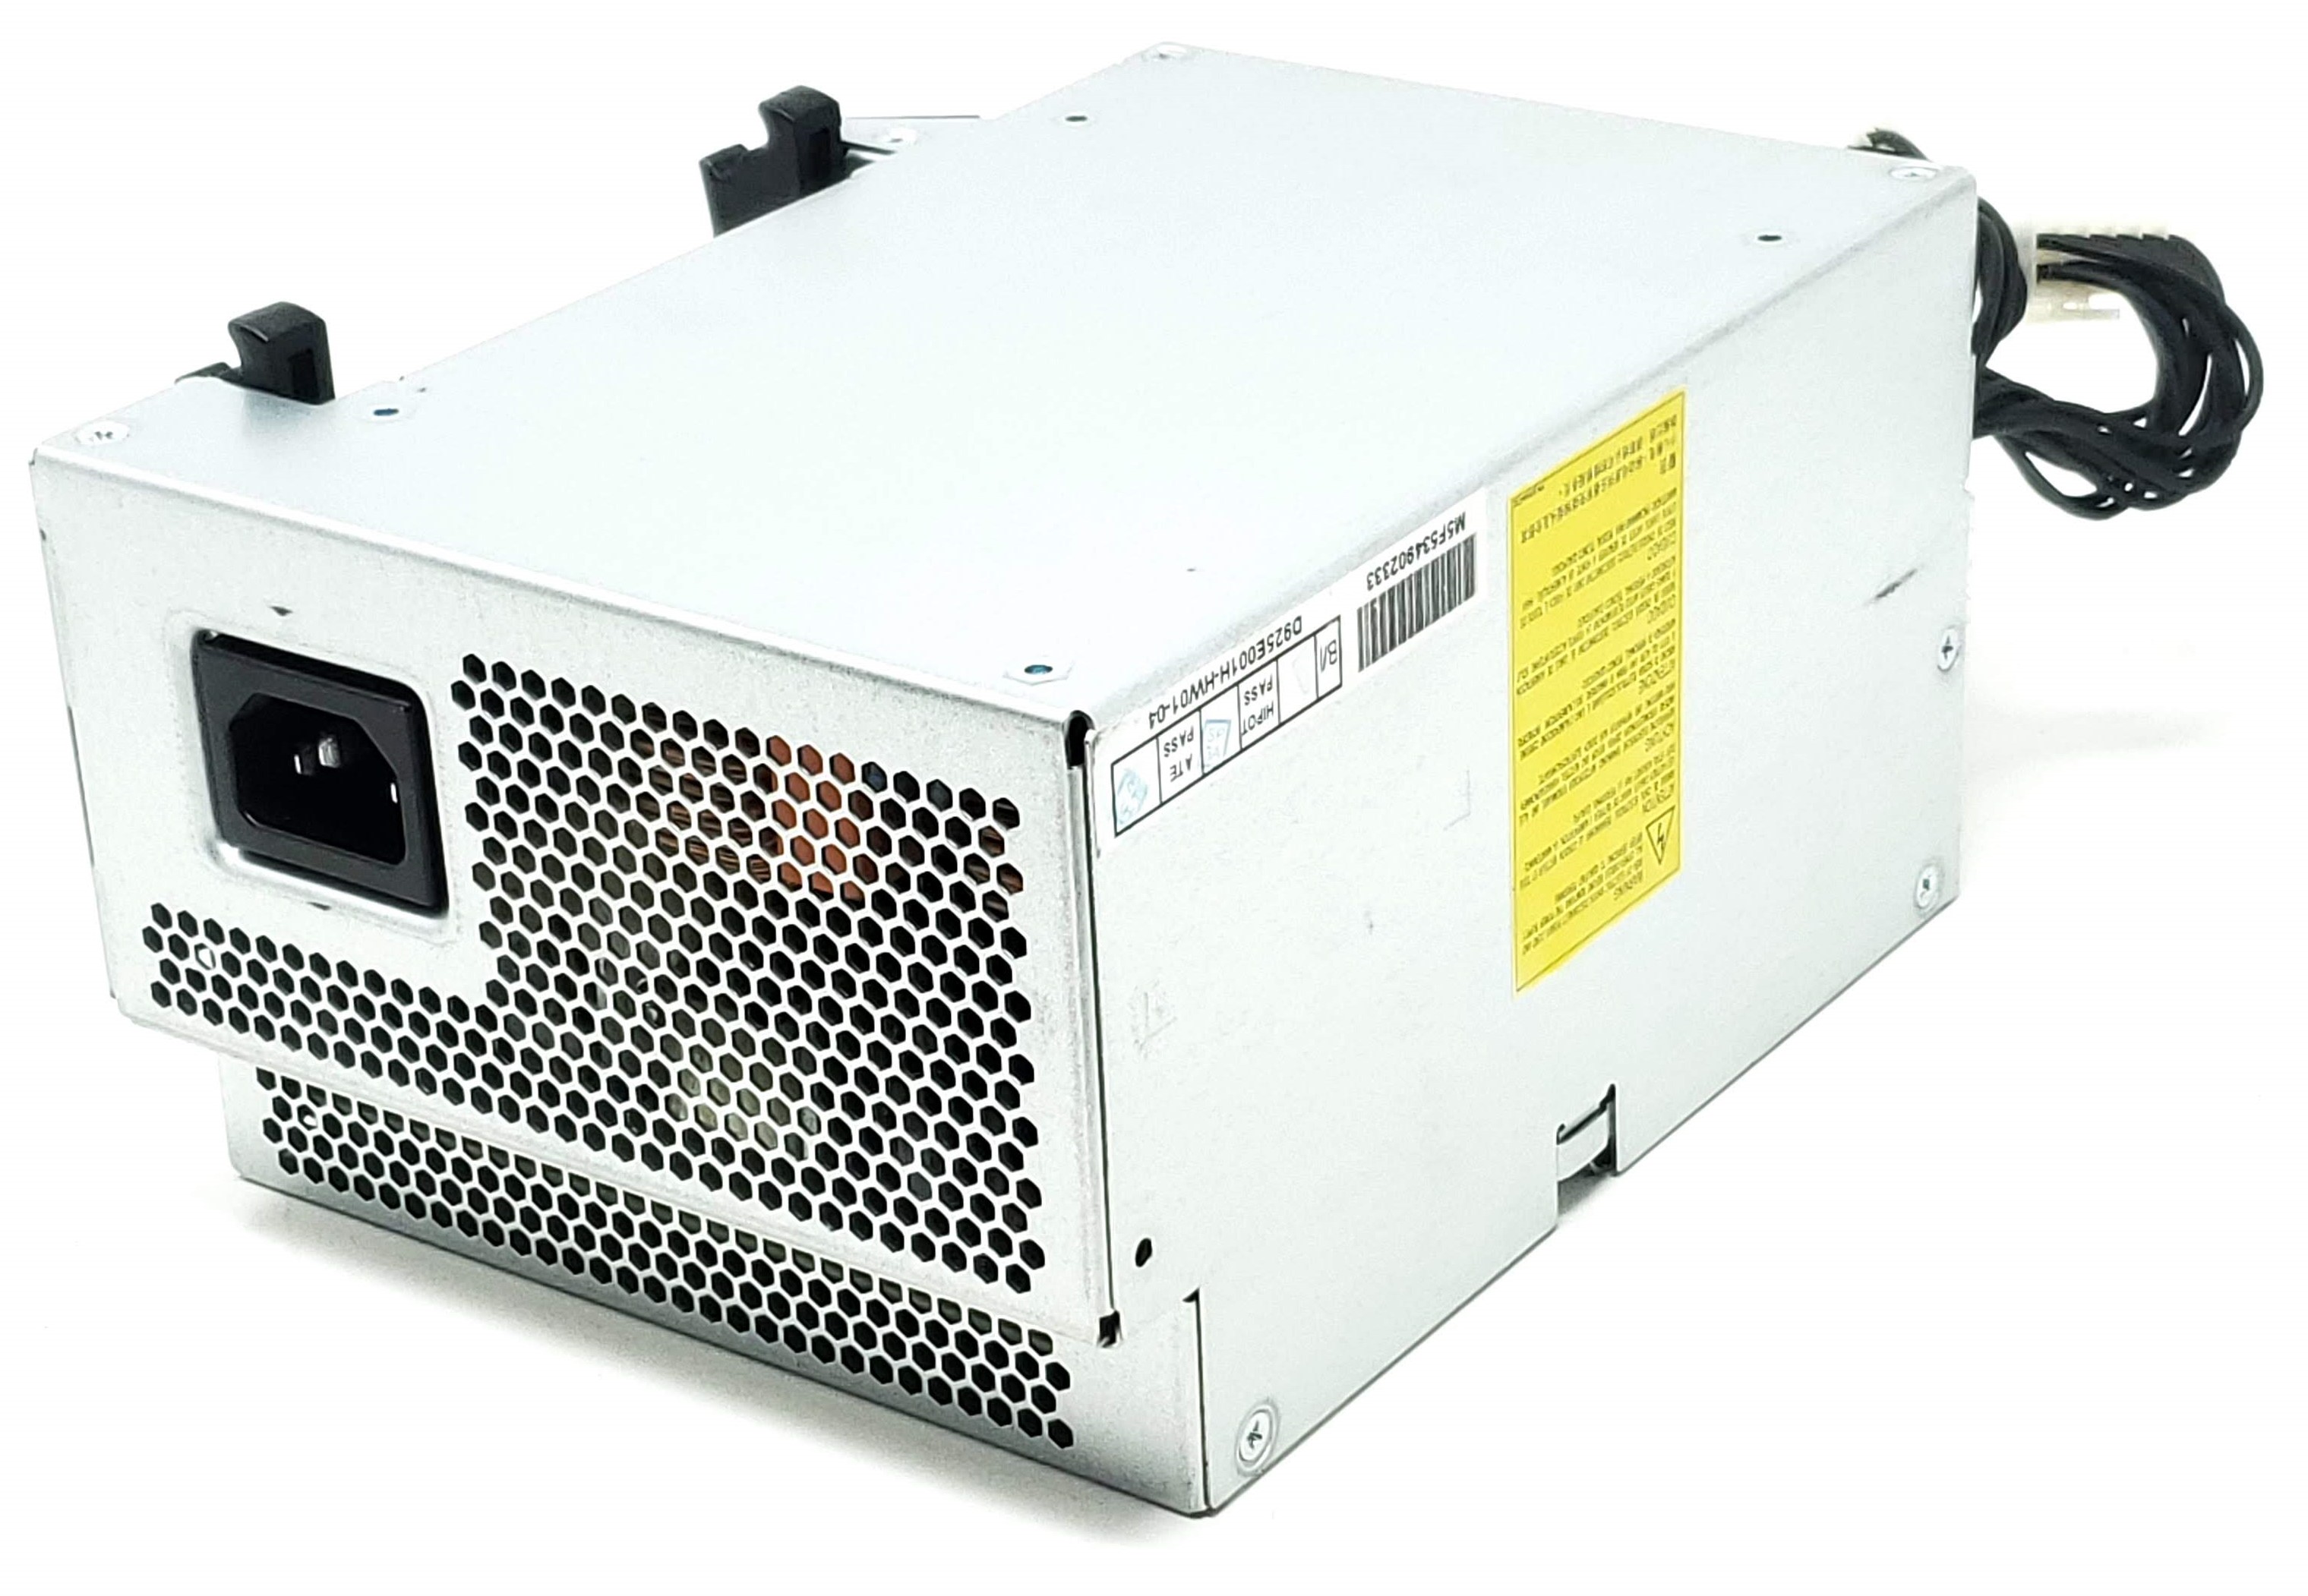 HP 719797-002 - Power supply - Rated at 925 Watts, 90% efficient